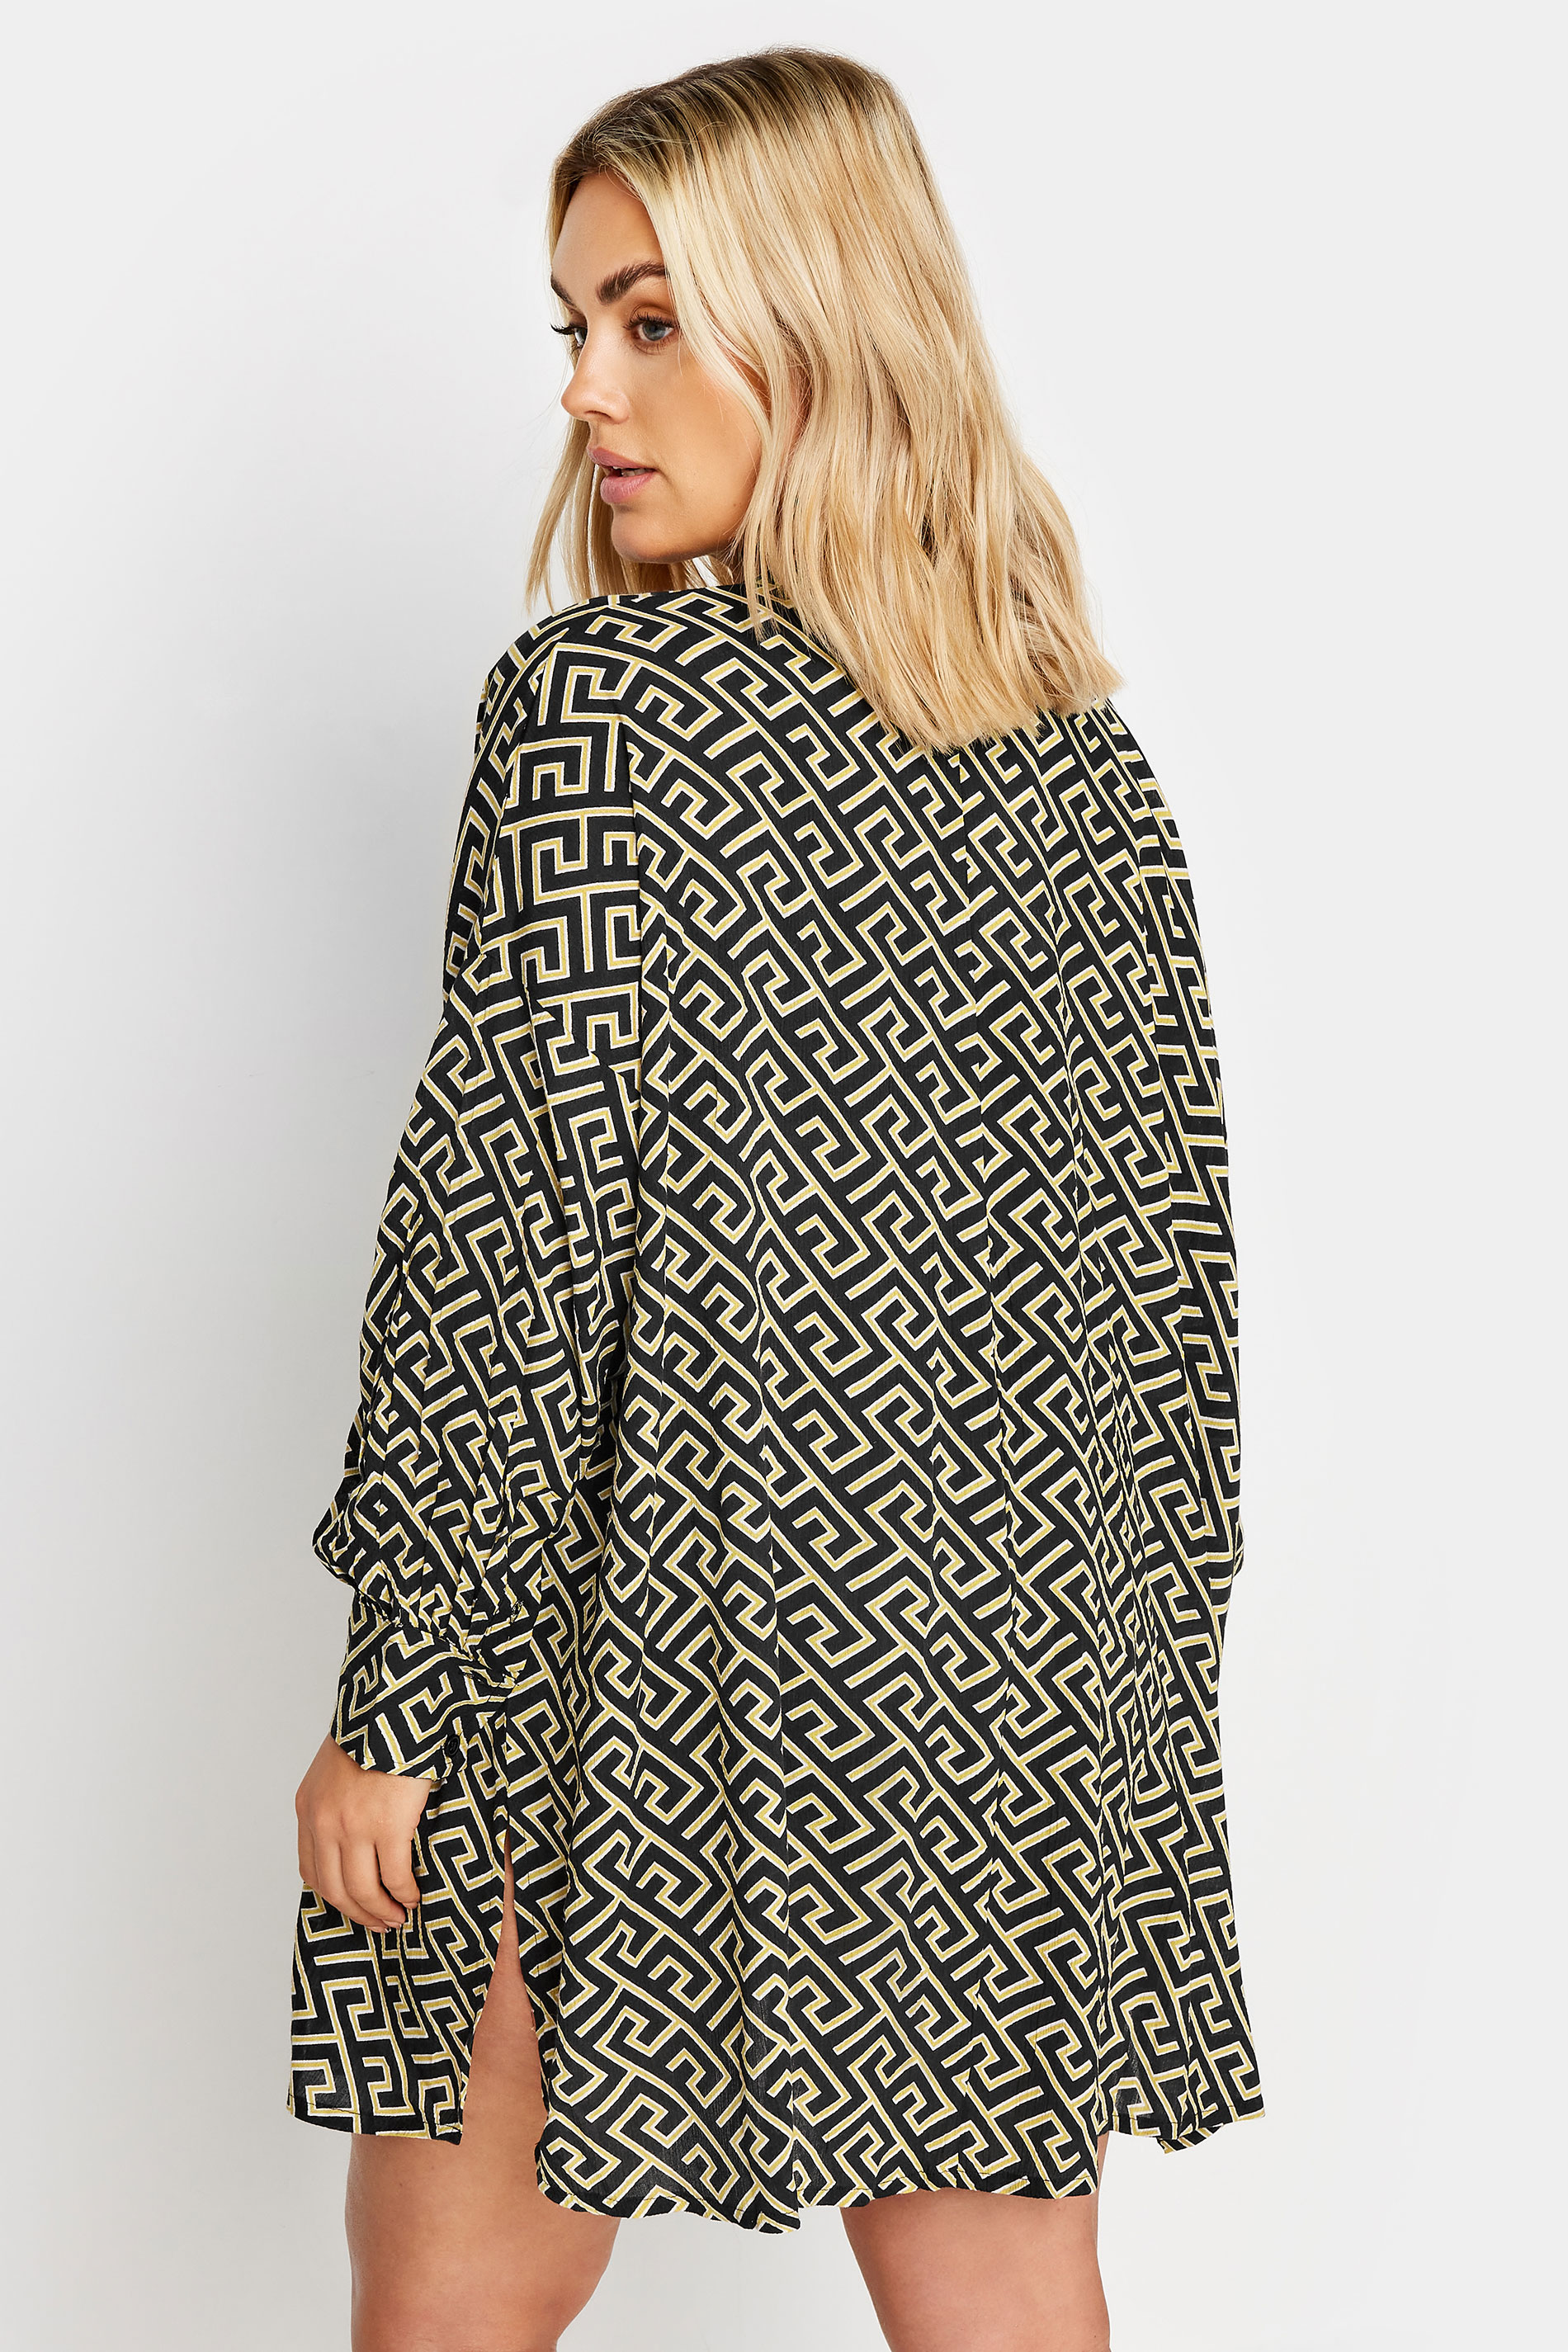 YOURS Plus Size Black Geometric Print Beach Shirt | Yours Clothing 3